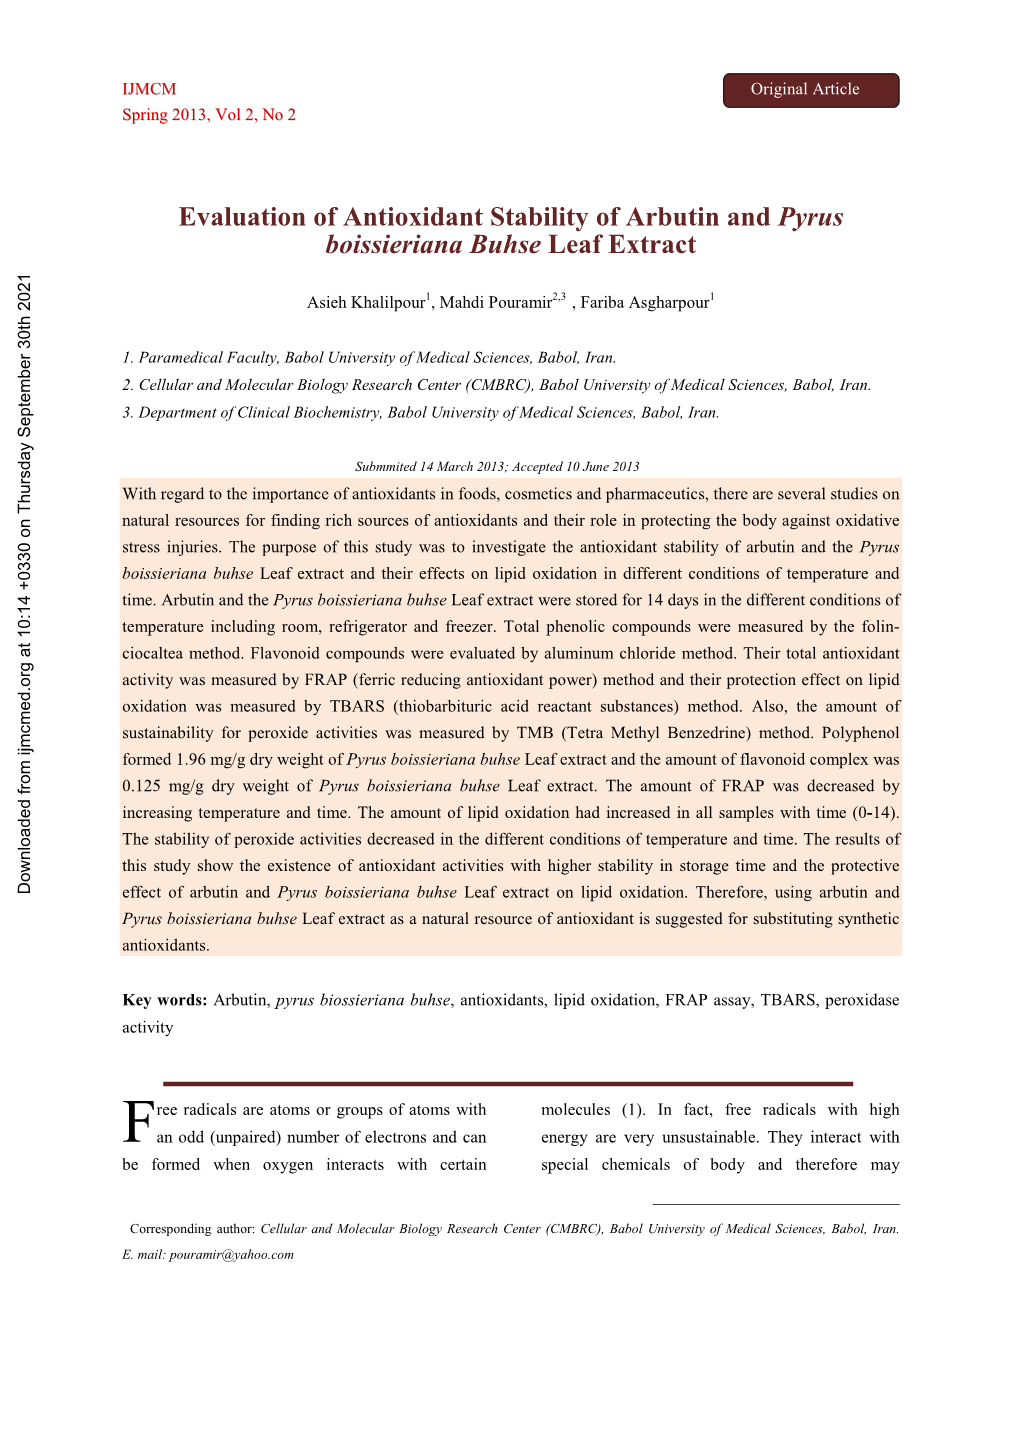 Evaluation of Antioxidant Stability of Arbutin and Pyrus Boissieriana Buhse Leaf Extract